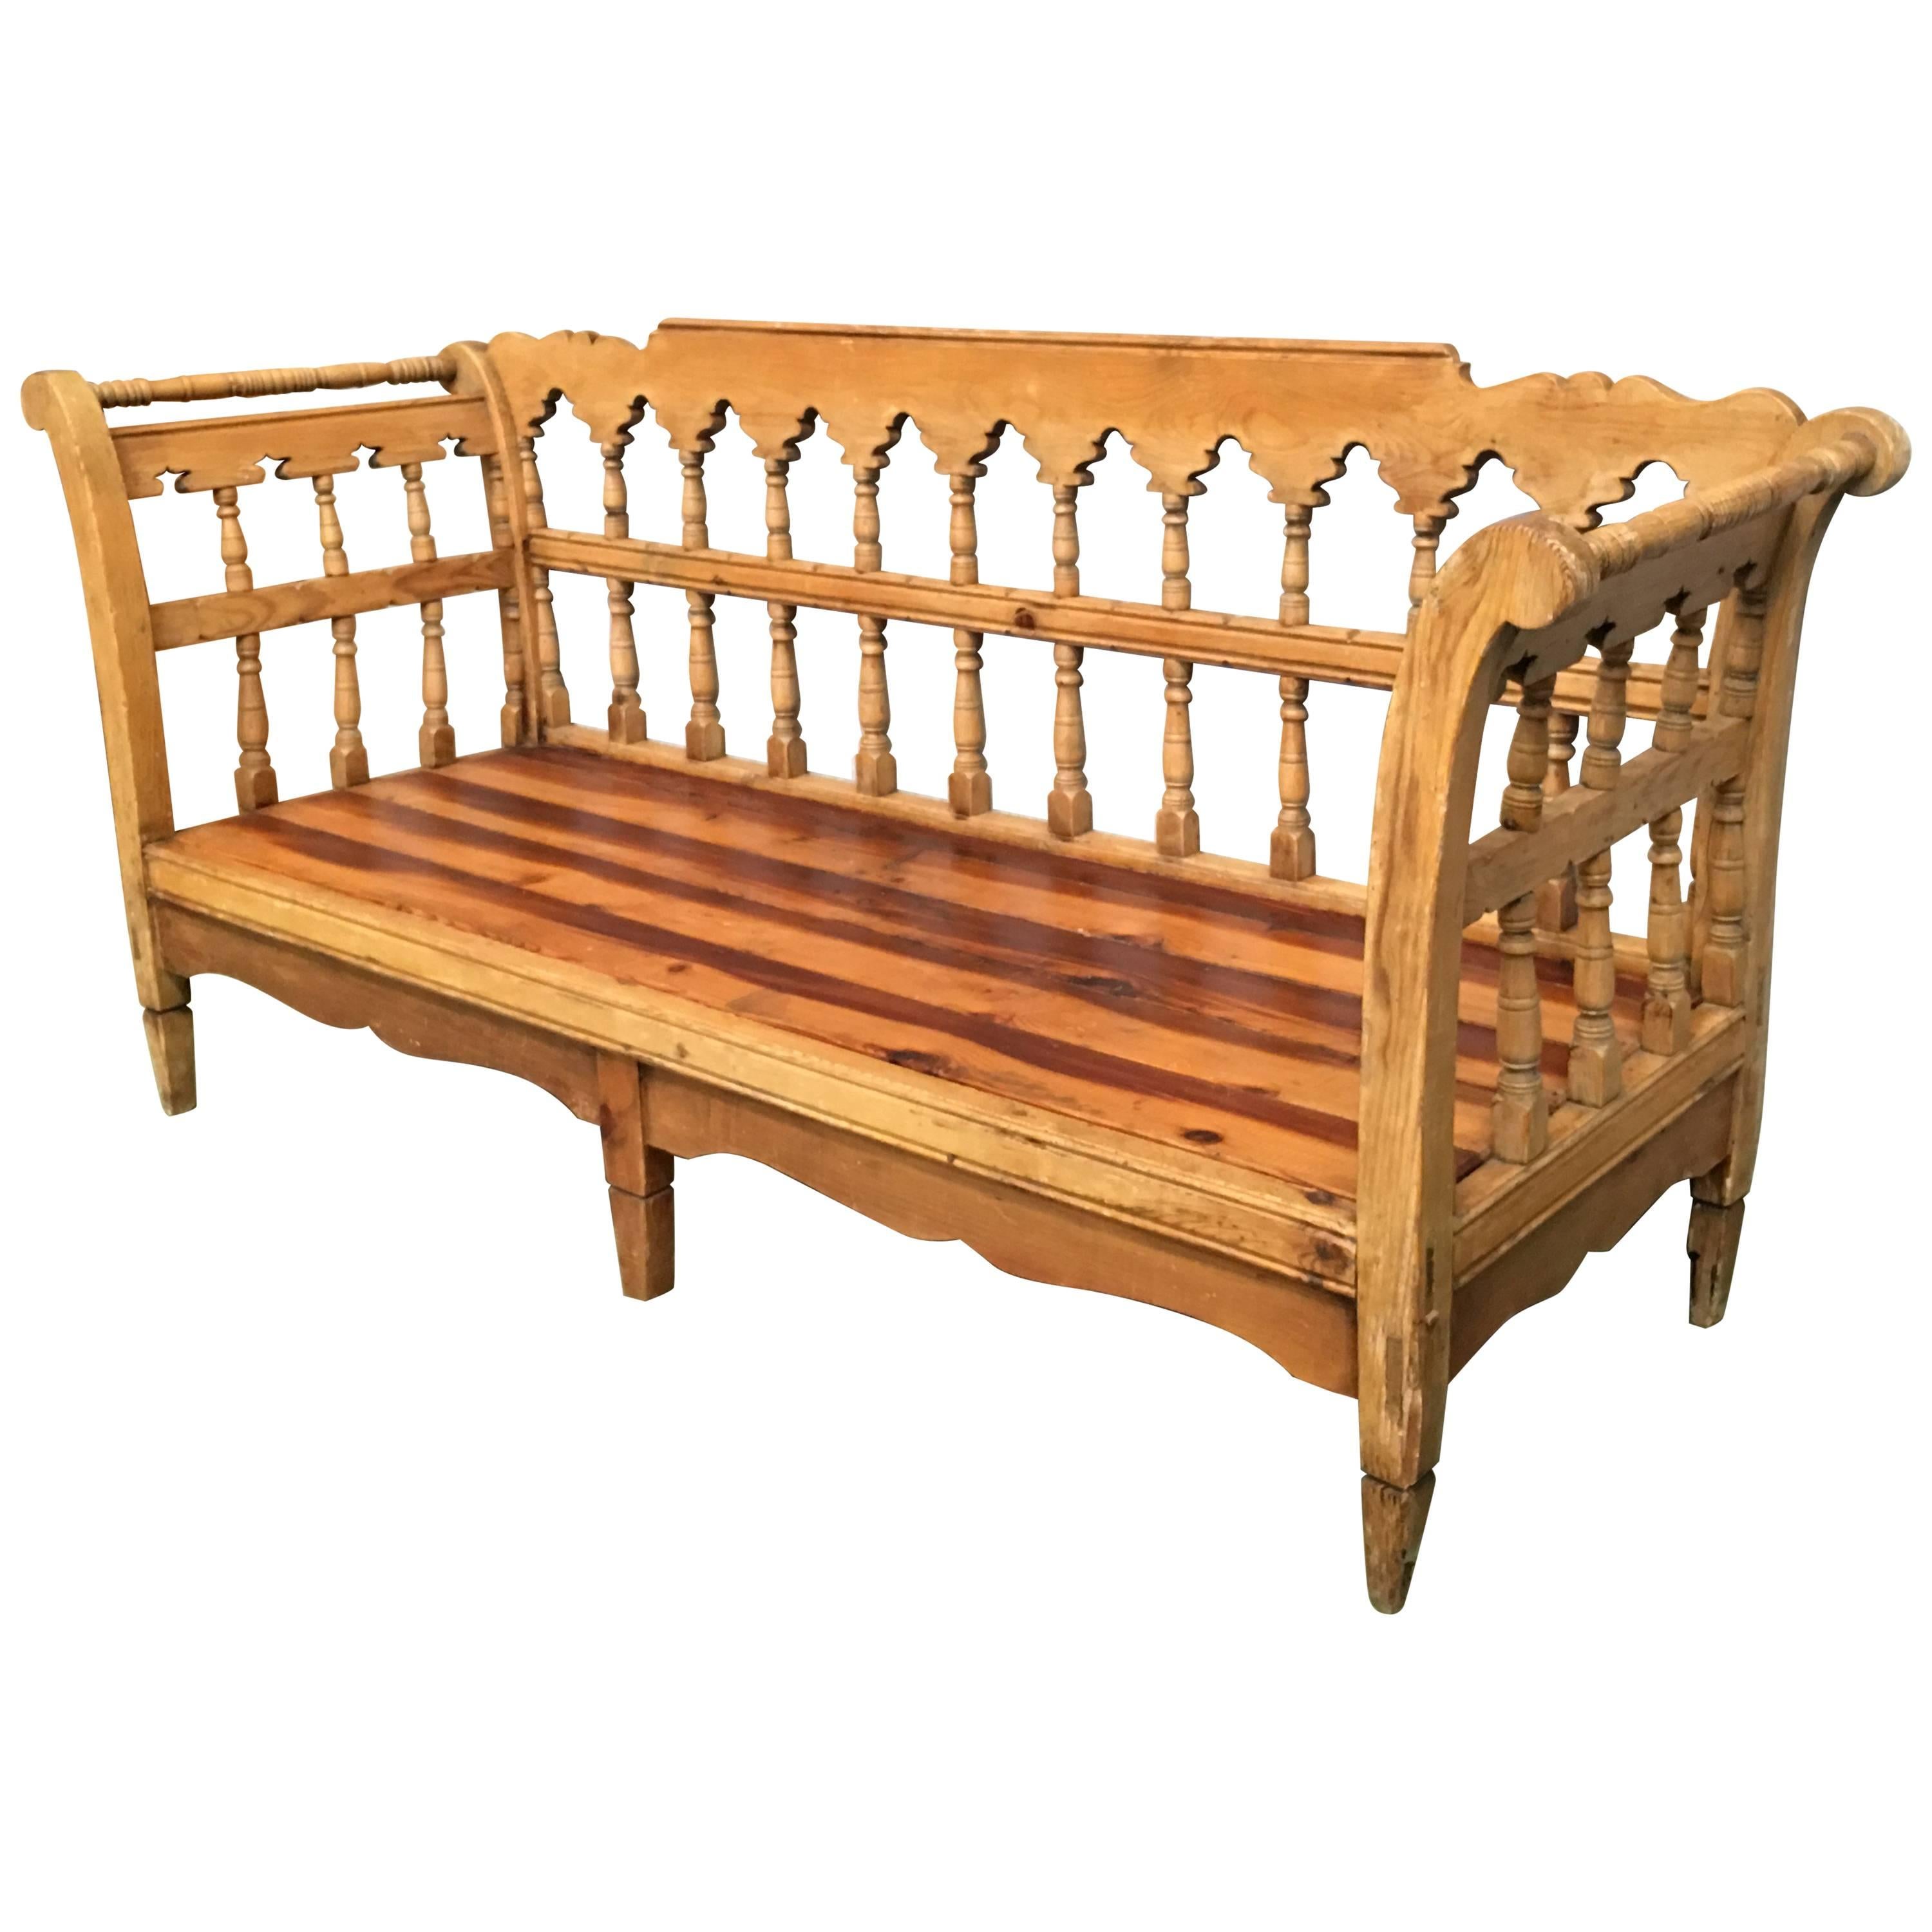 19th Century Large Pine Country Bench or Daybed